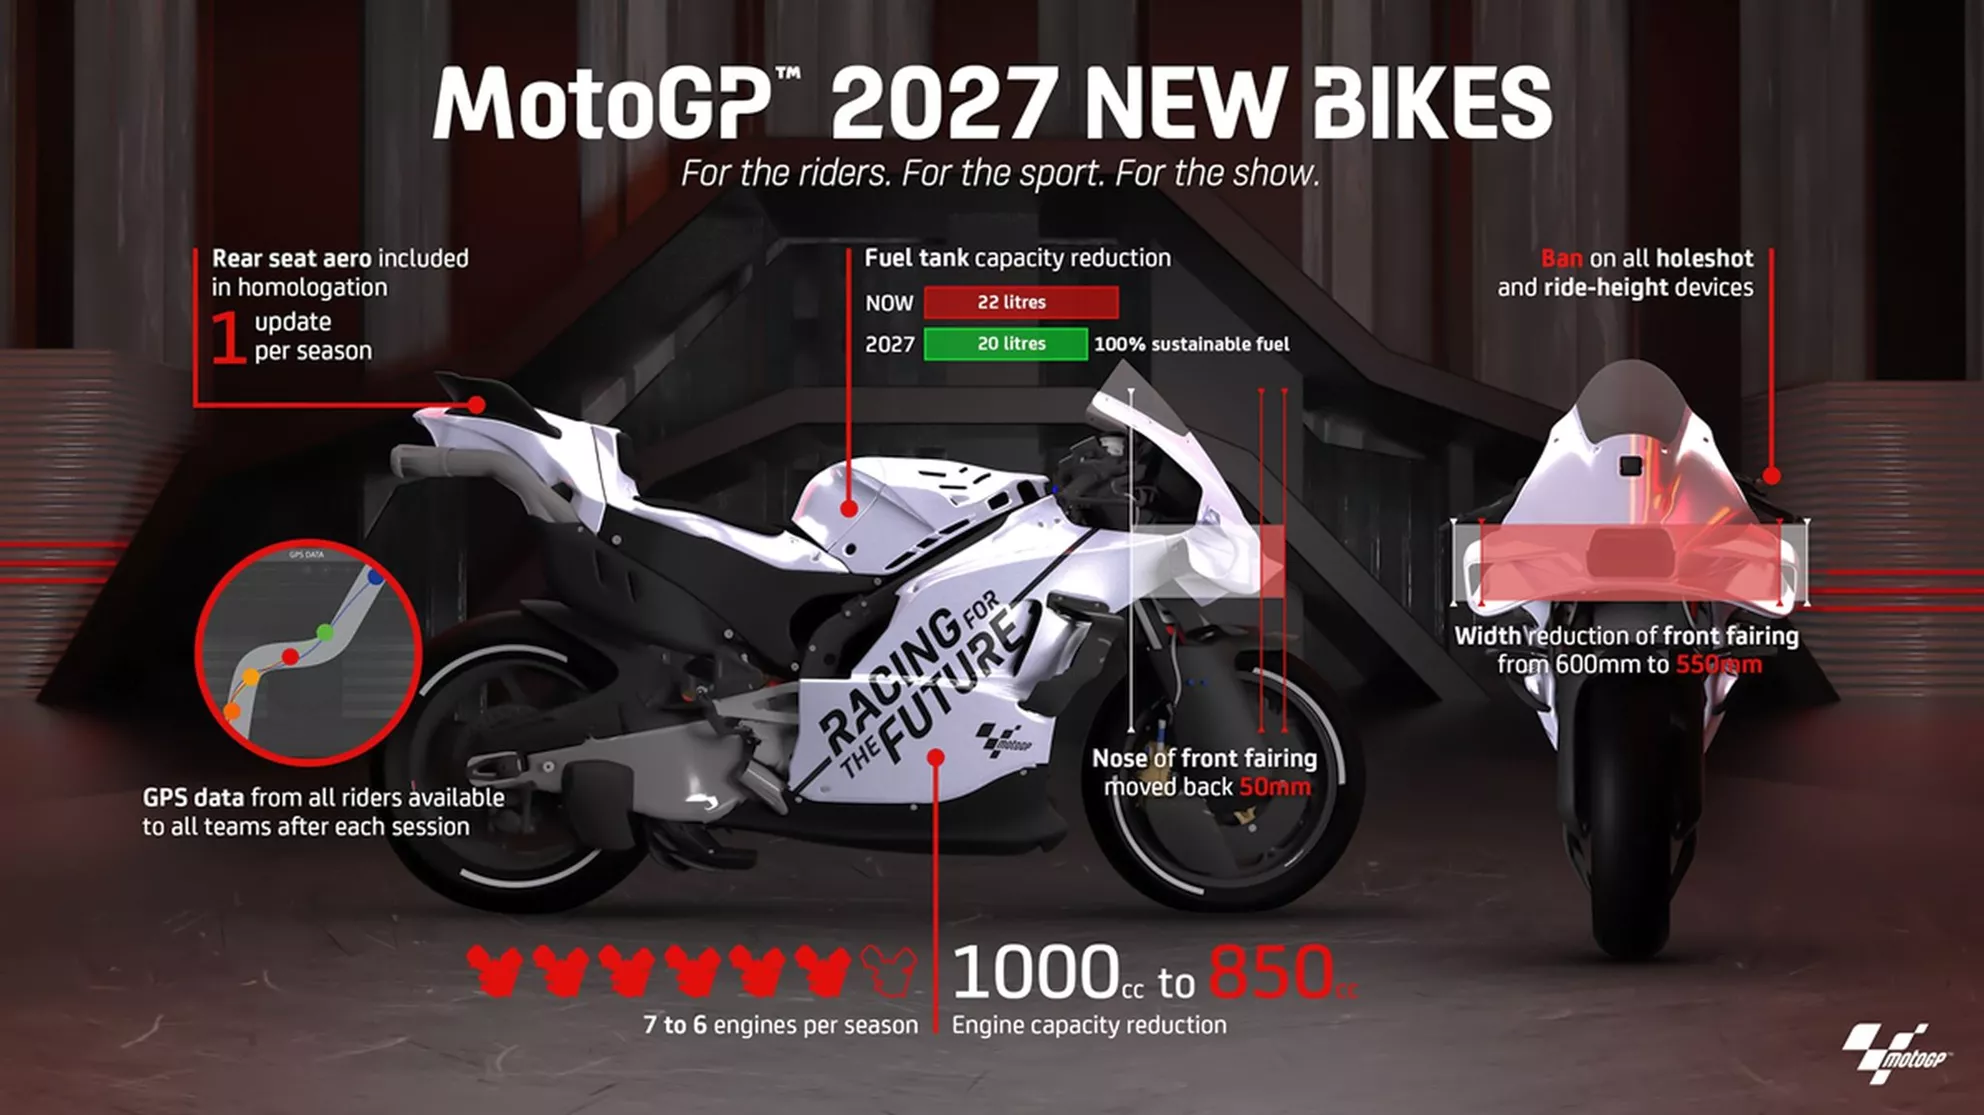 The changes to the 2027 bikes at a glance